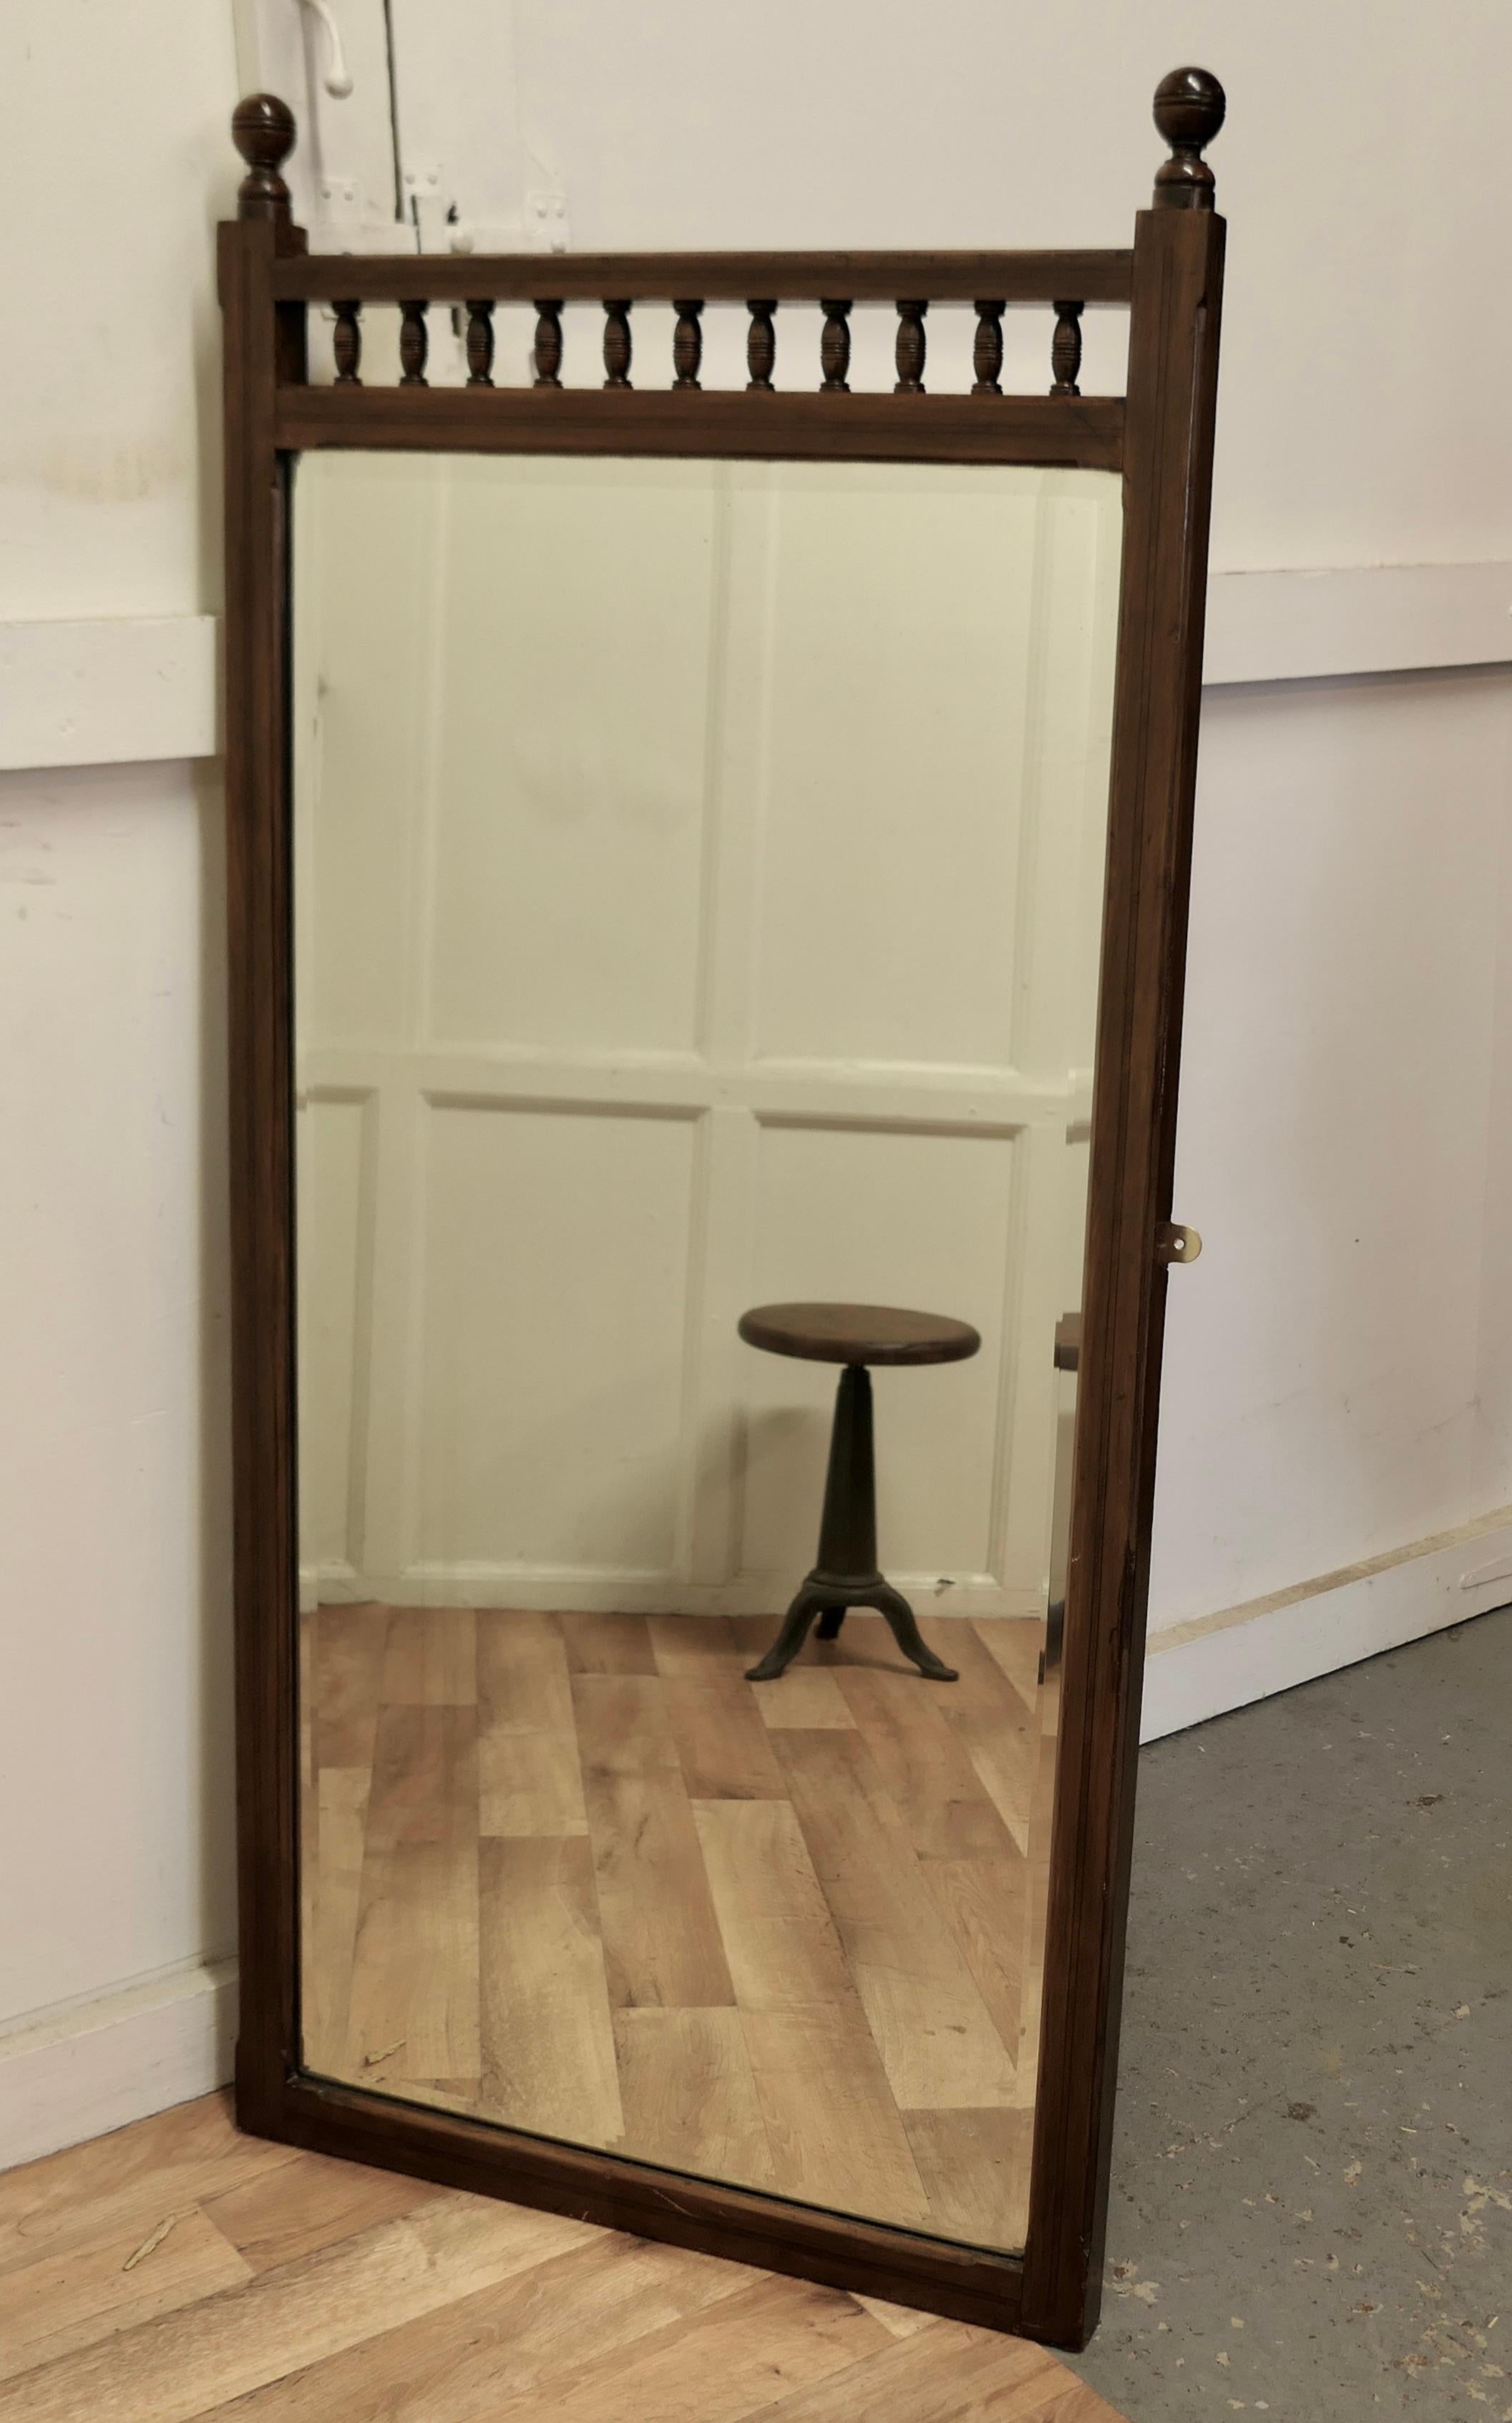 A Tall Walnut Arts and Crafts dressing mirror

This is a long Mirror the frame is in figured walnut with a little inlaid decoration at the sides, a row of turned spindles and curved knobs on the top
Both the frame and the bevelled mirror are in